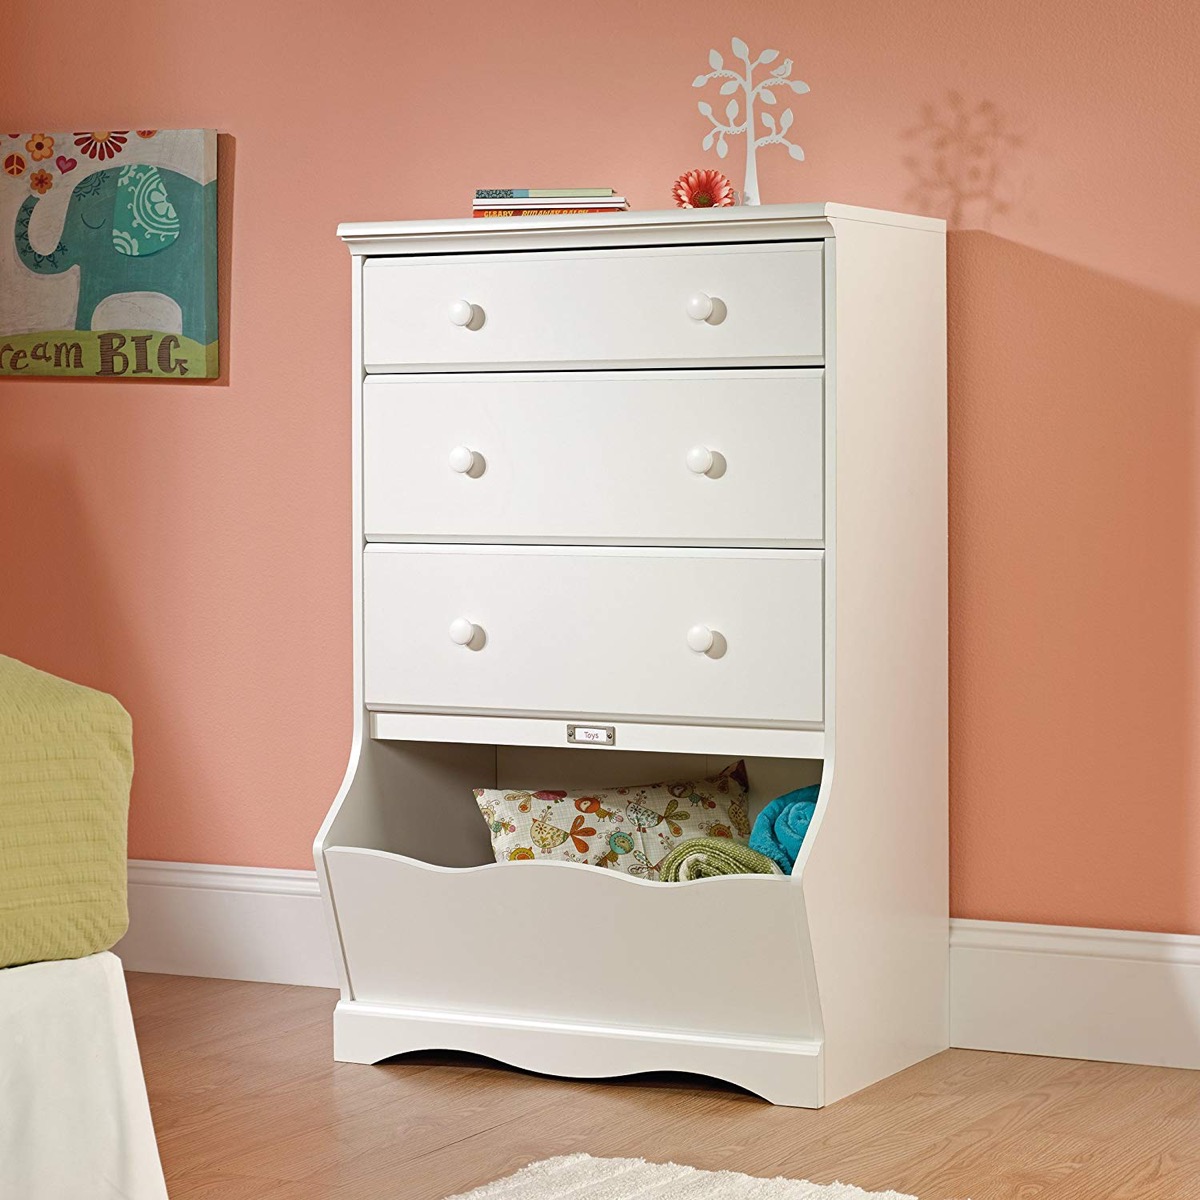 A White Dresser From Amazon {Save Money on Furniture}